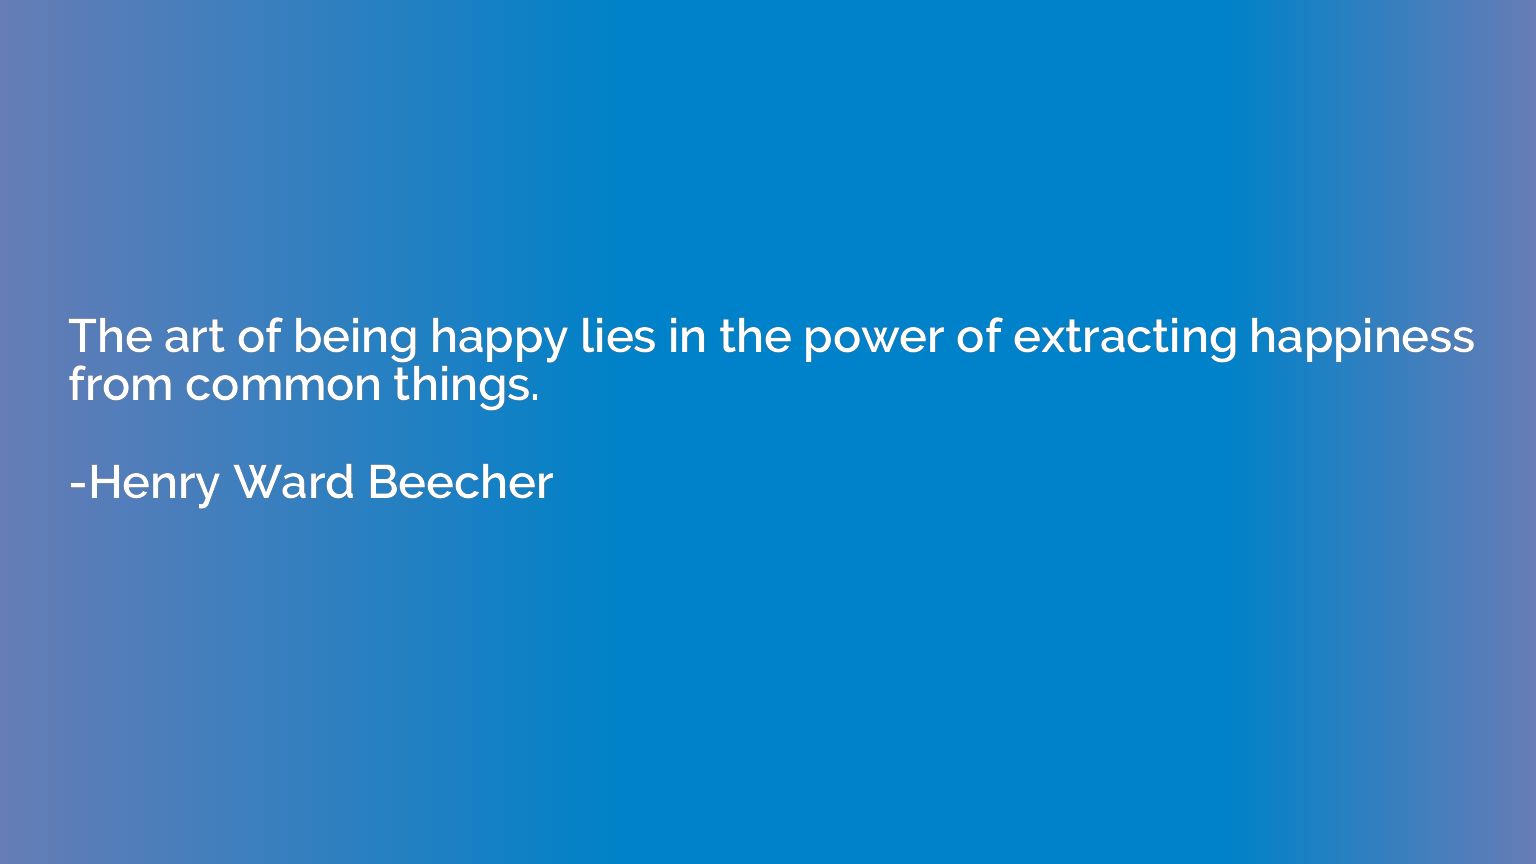 The art of being happy lies in the power of extracting happi